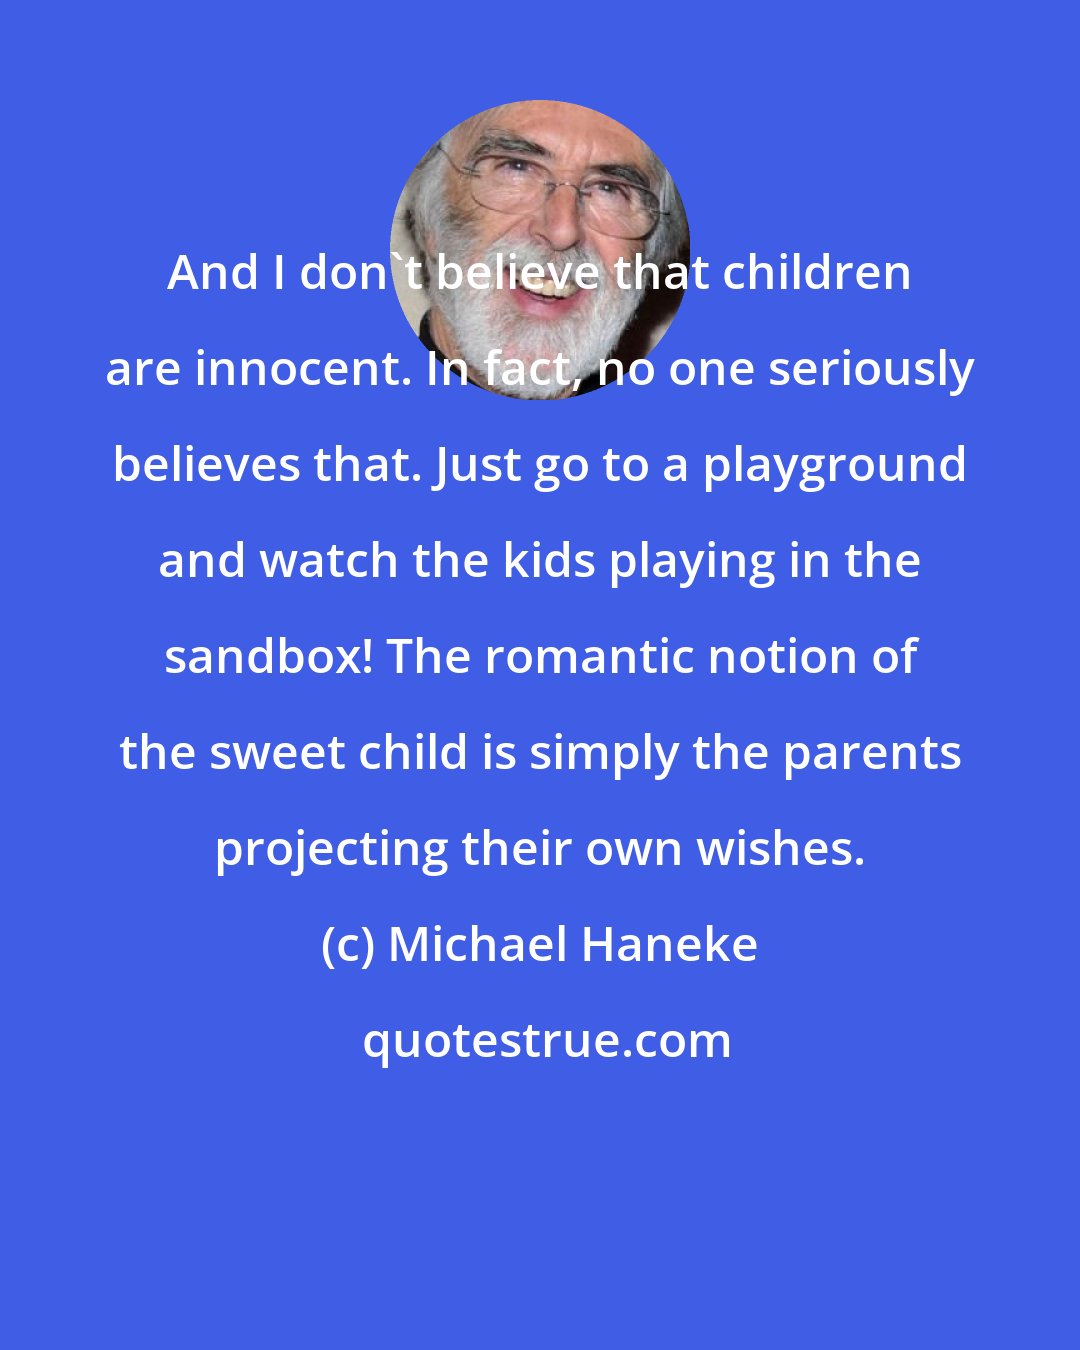 Michael Haneke: And I don't believe that children are innocent. In fact, no one seriously believes that. Just go to a playground and watch the kids playing in the sandbox! The romantic notion of the sweet child is simply the parents projecting their own wishes.